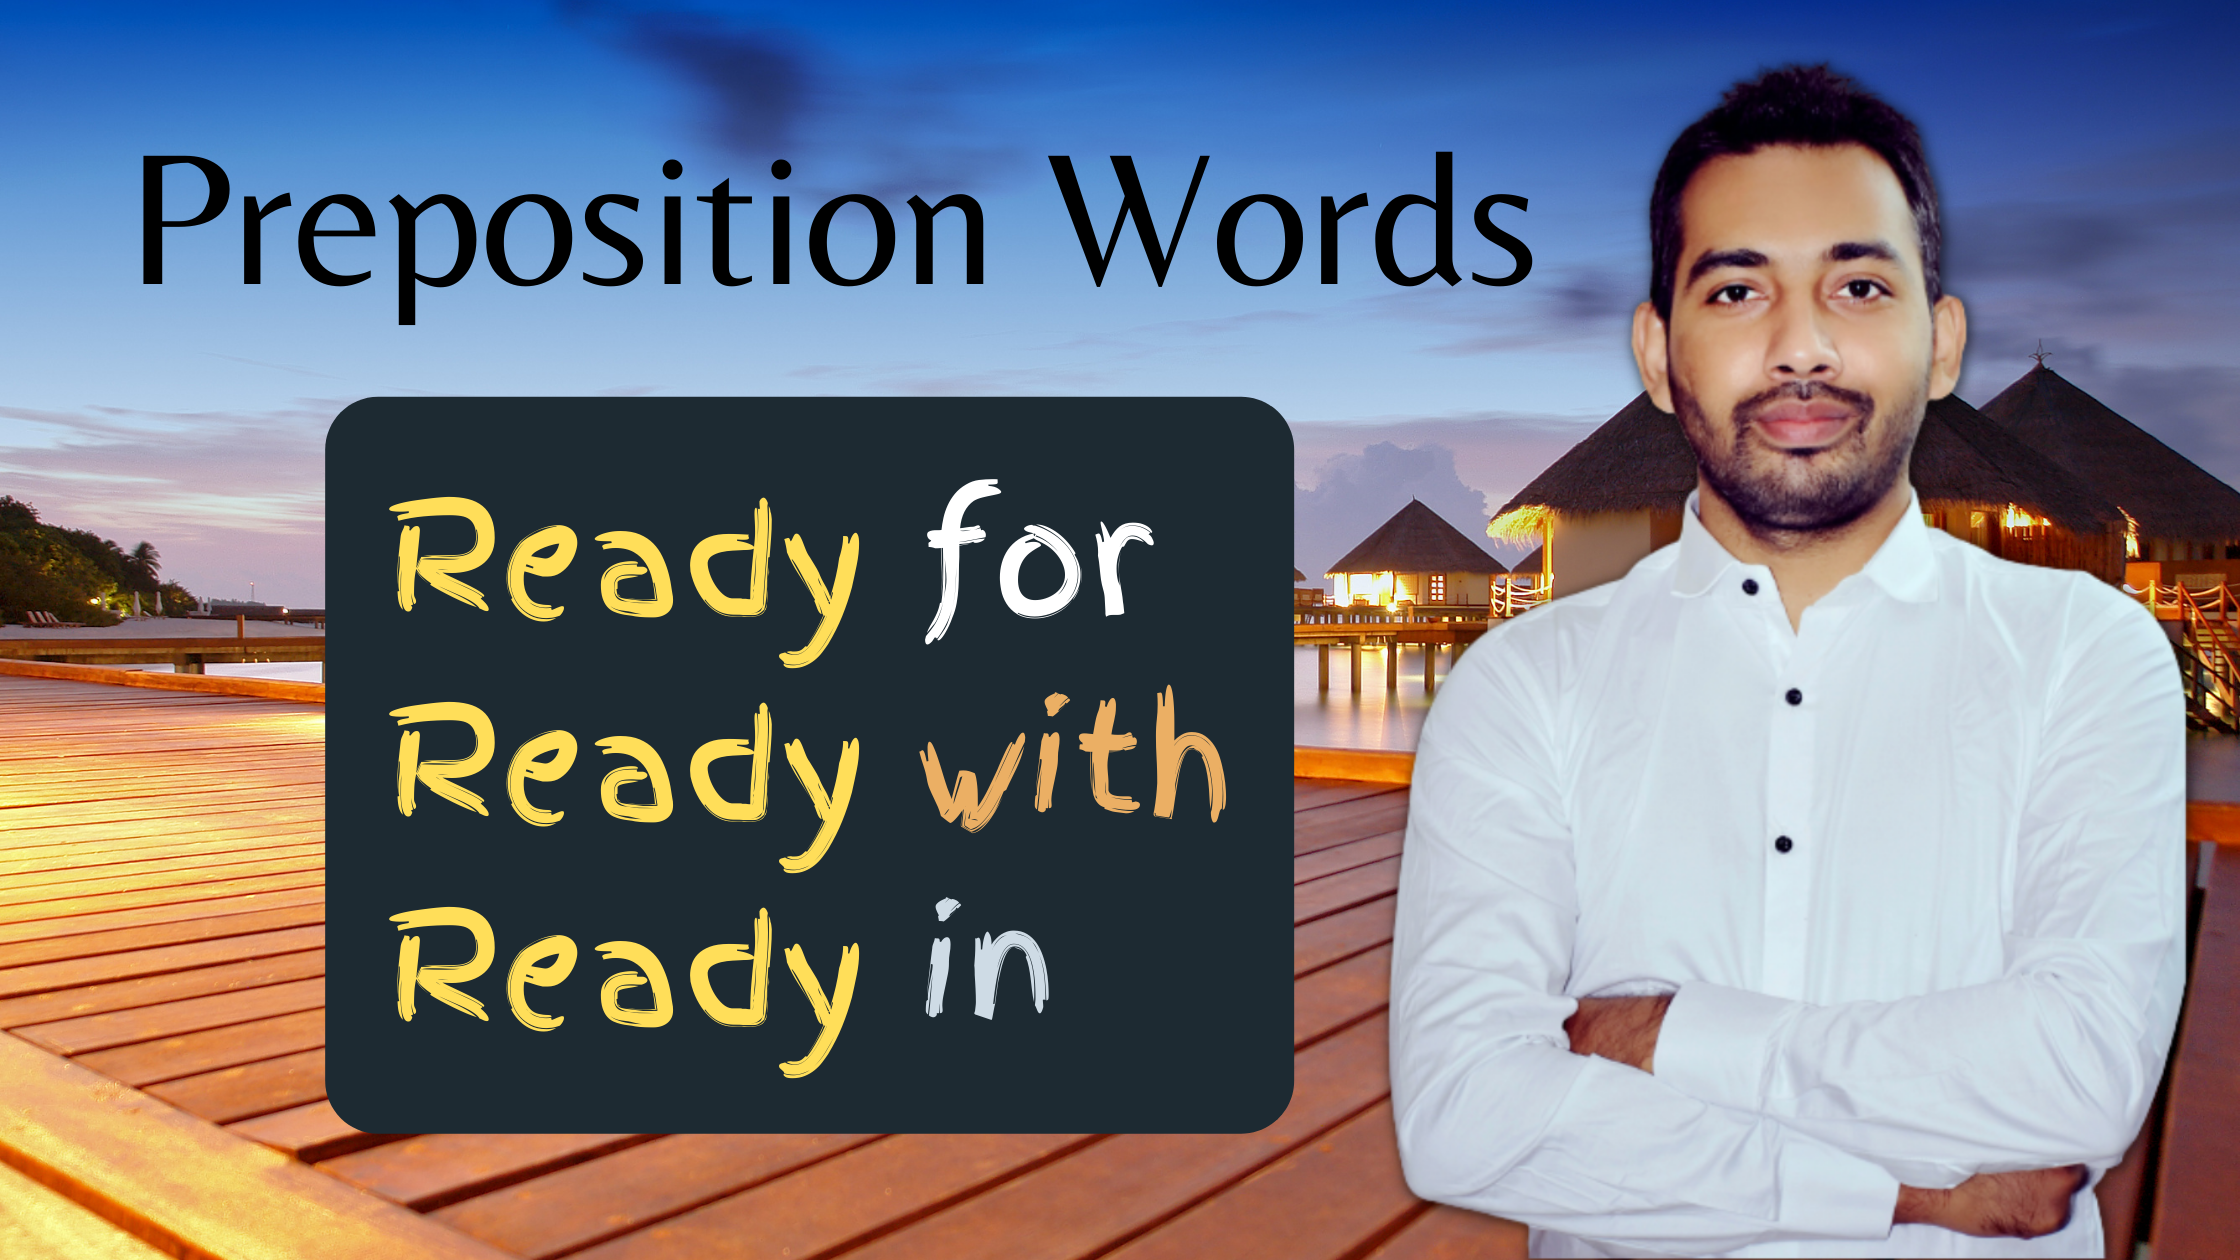 Preposition words with ready - ready with different prepositions